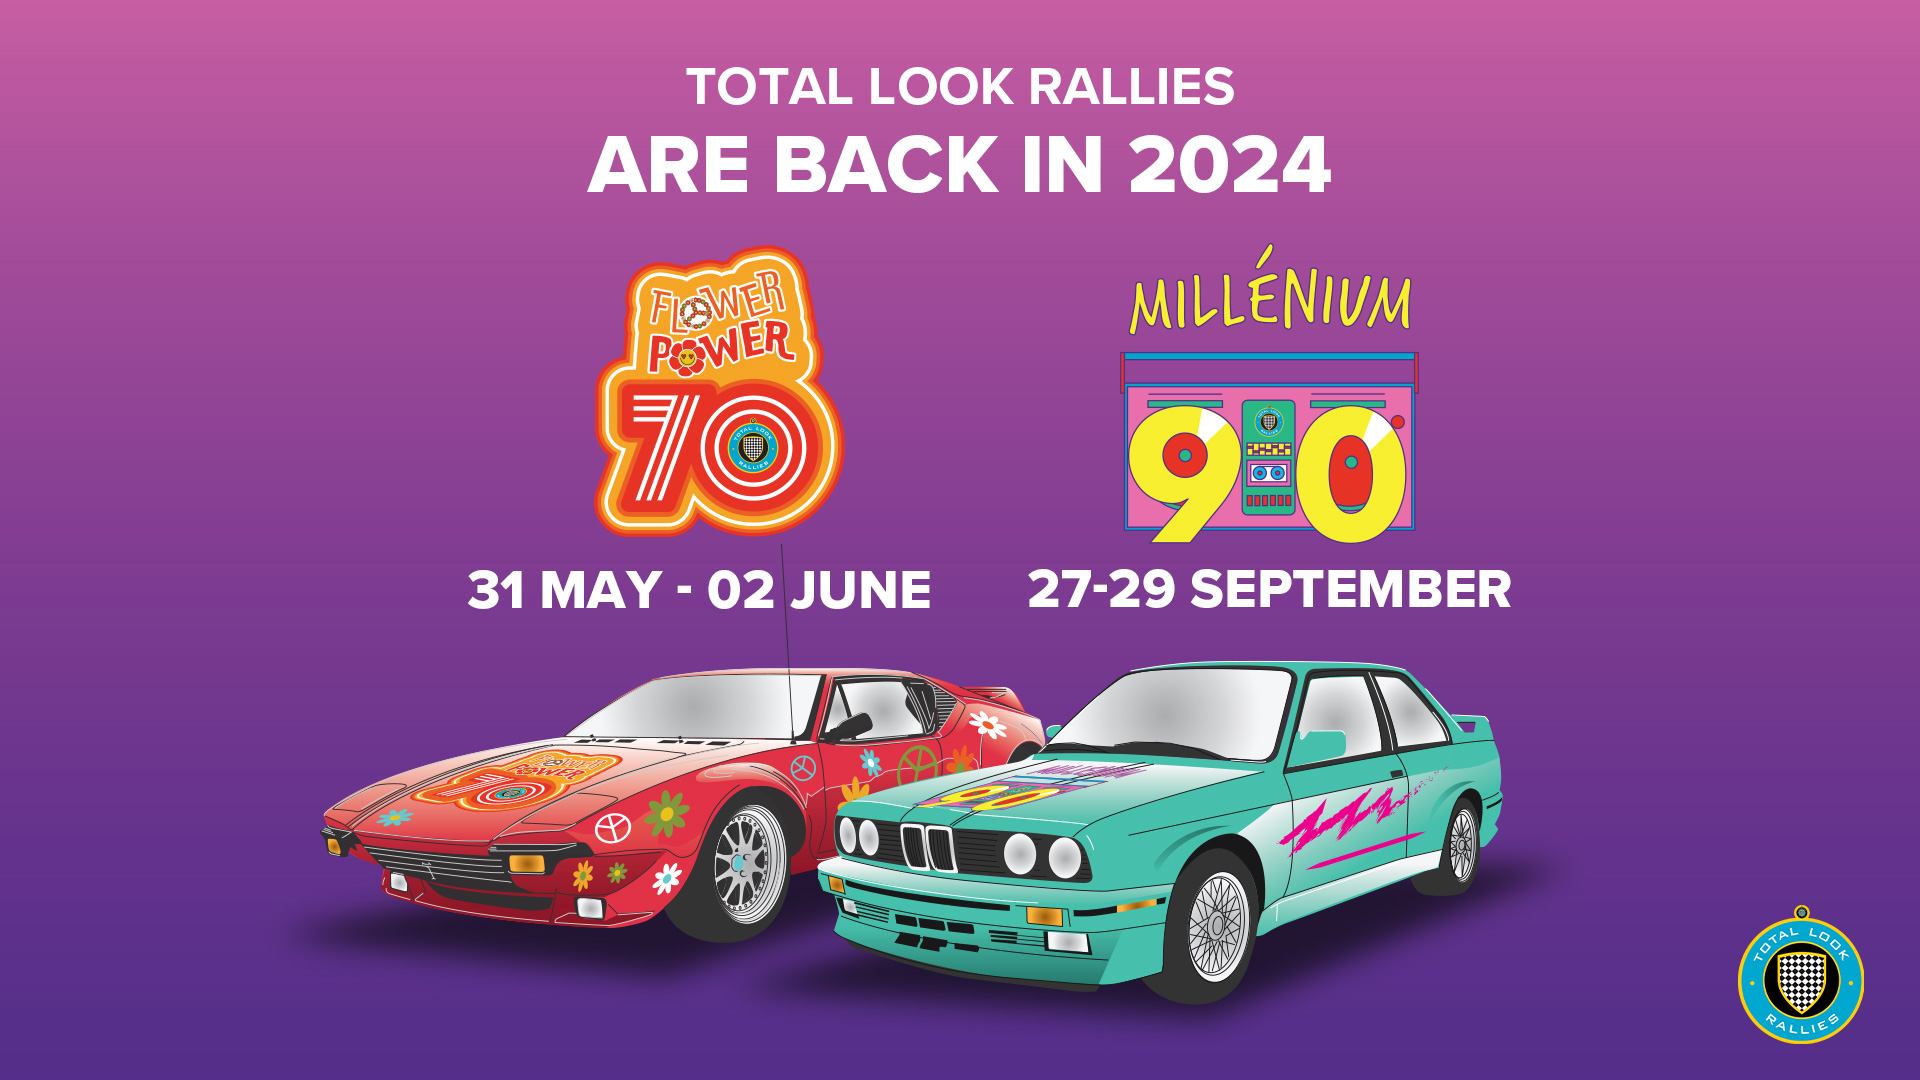 Total Look Rallies are back in 2024